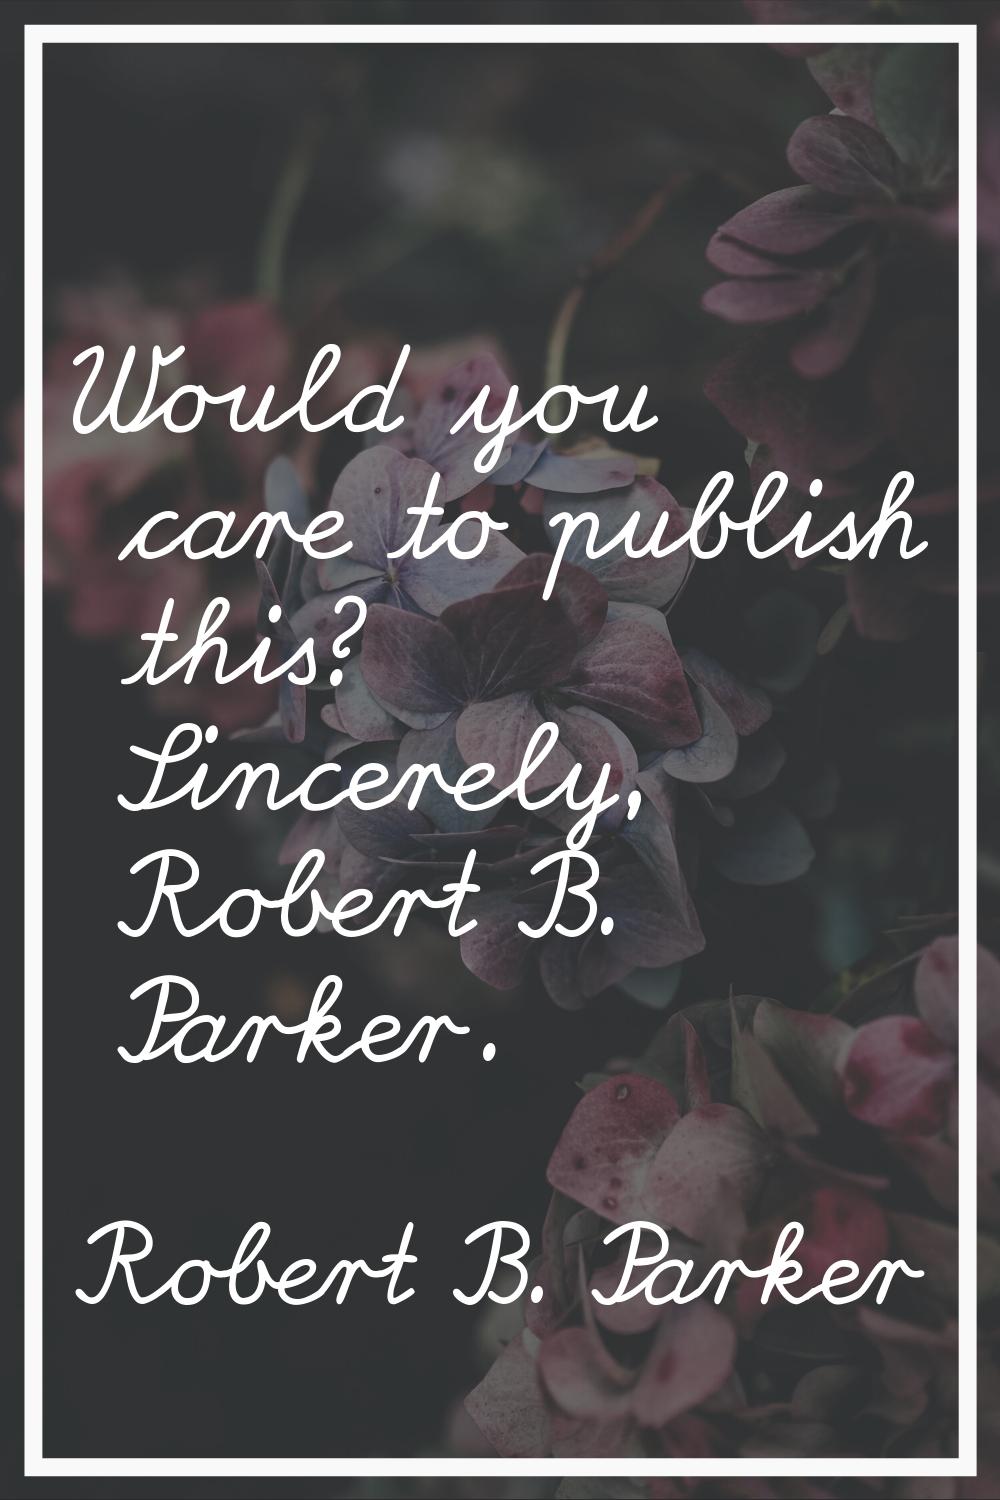 Would you care to publish this? Sincerely, Robert B. Parker.